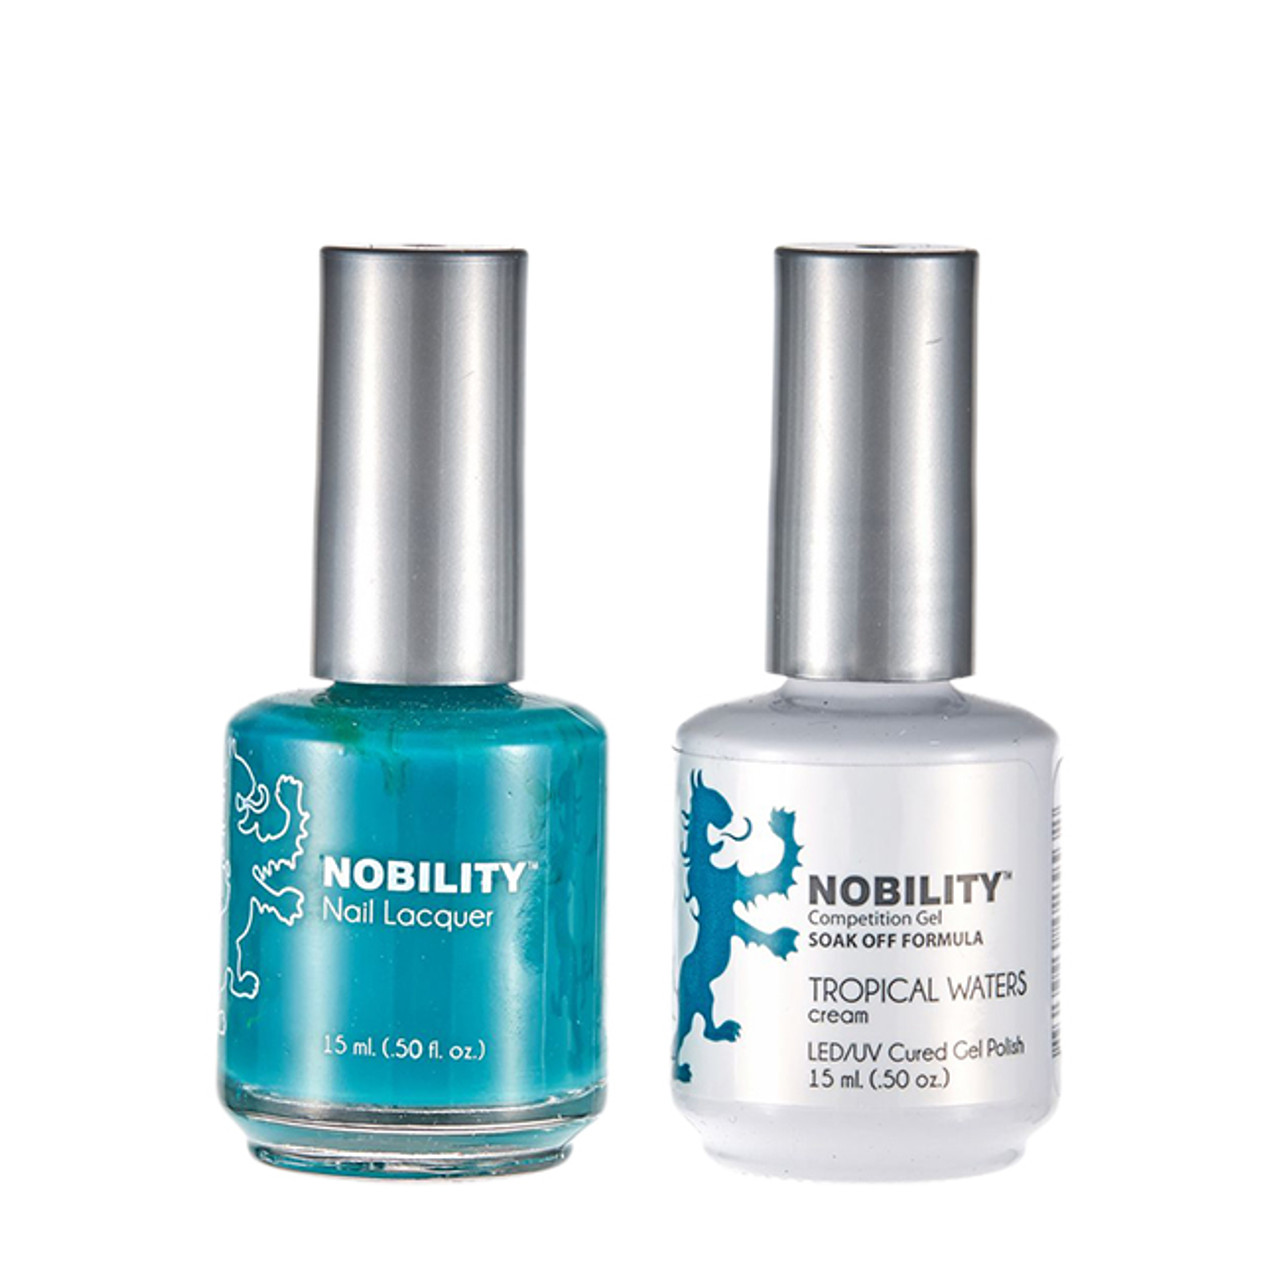 LeChat Nobility Gel Polish & Nail Lacquer Duo Set Tropical Waters - .5 oz / 15 ml